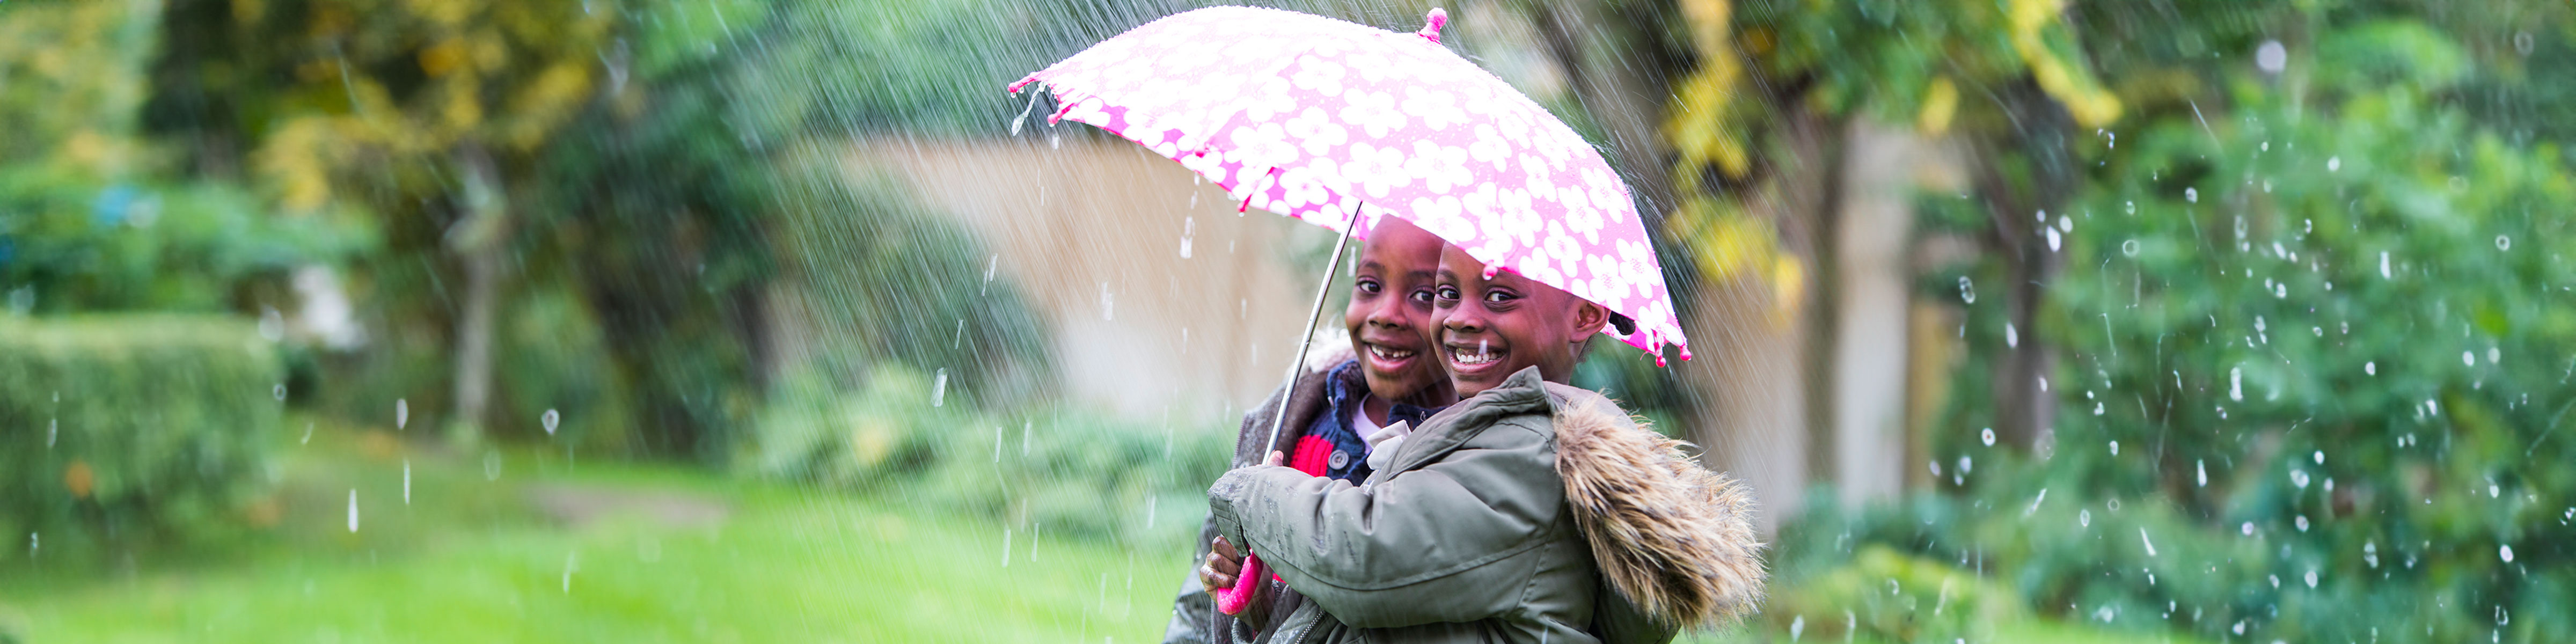 Two smiling young boys shelter under an umbrella from the rain